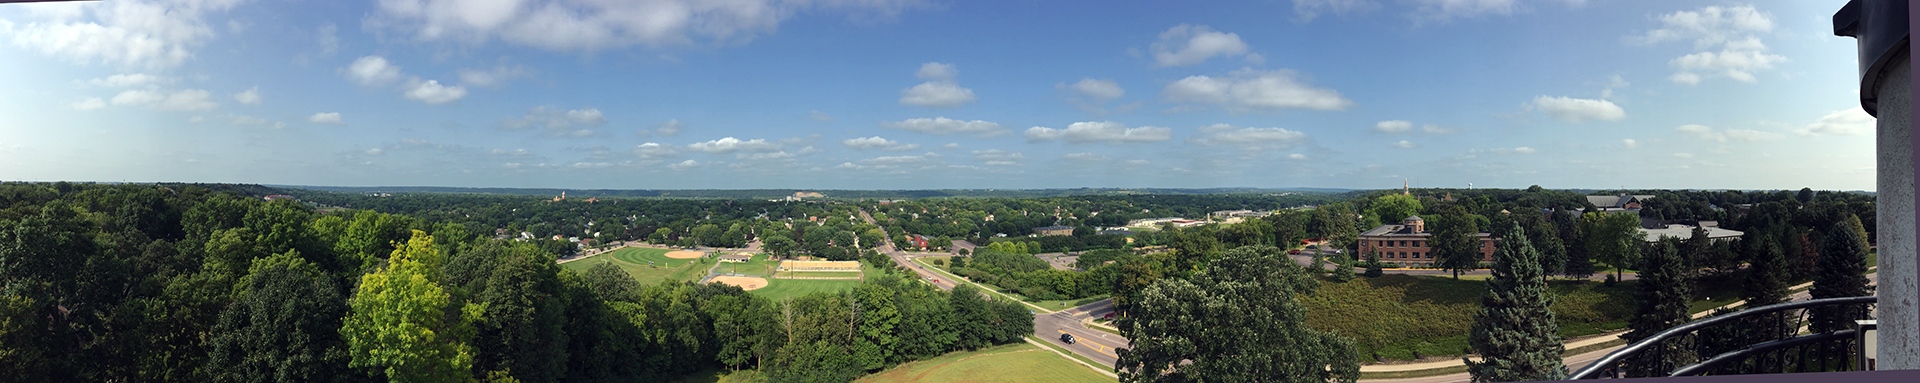 Top of Hermann Monument